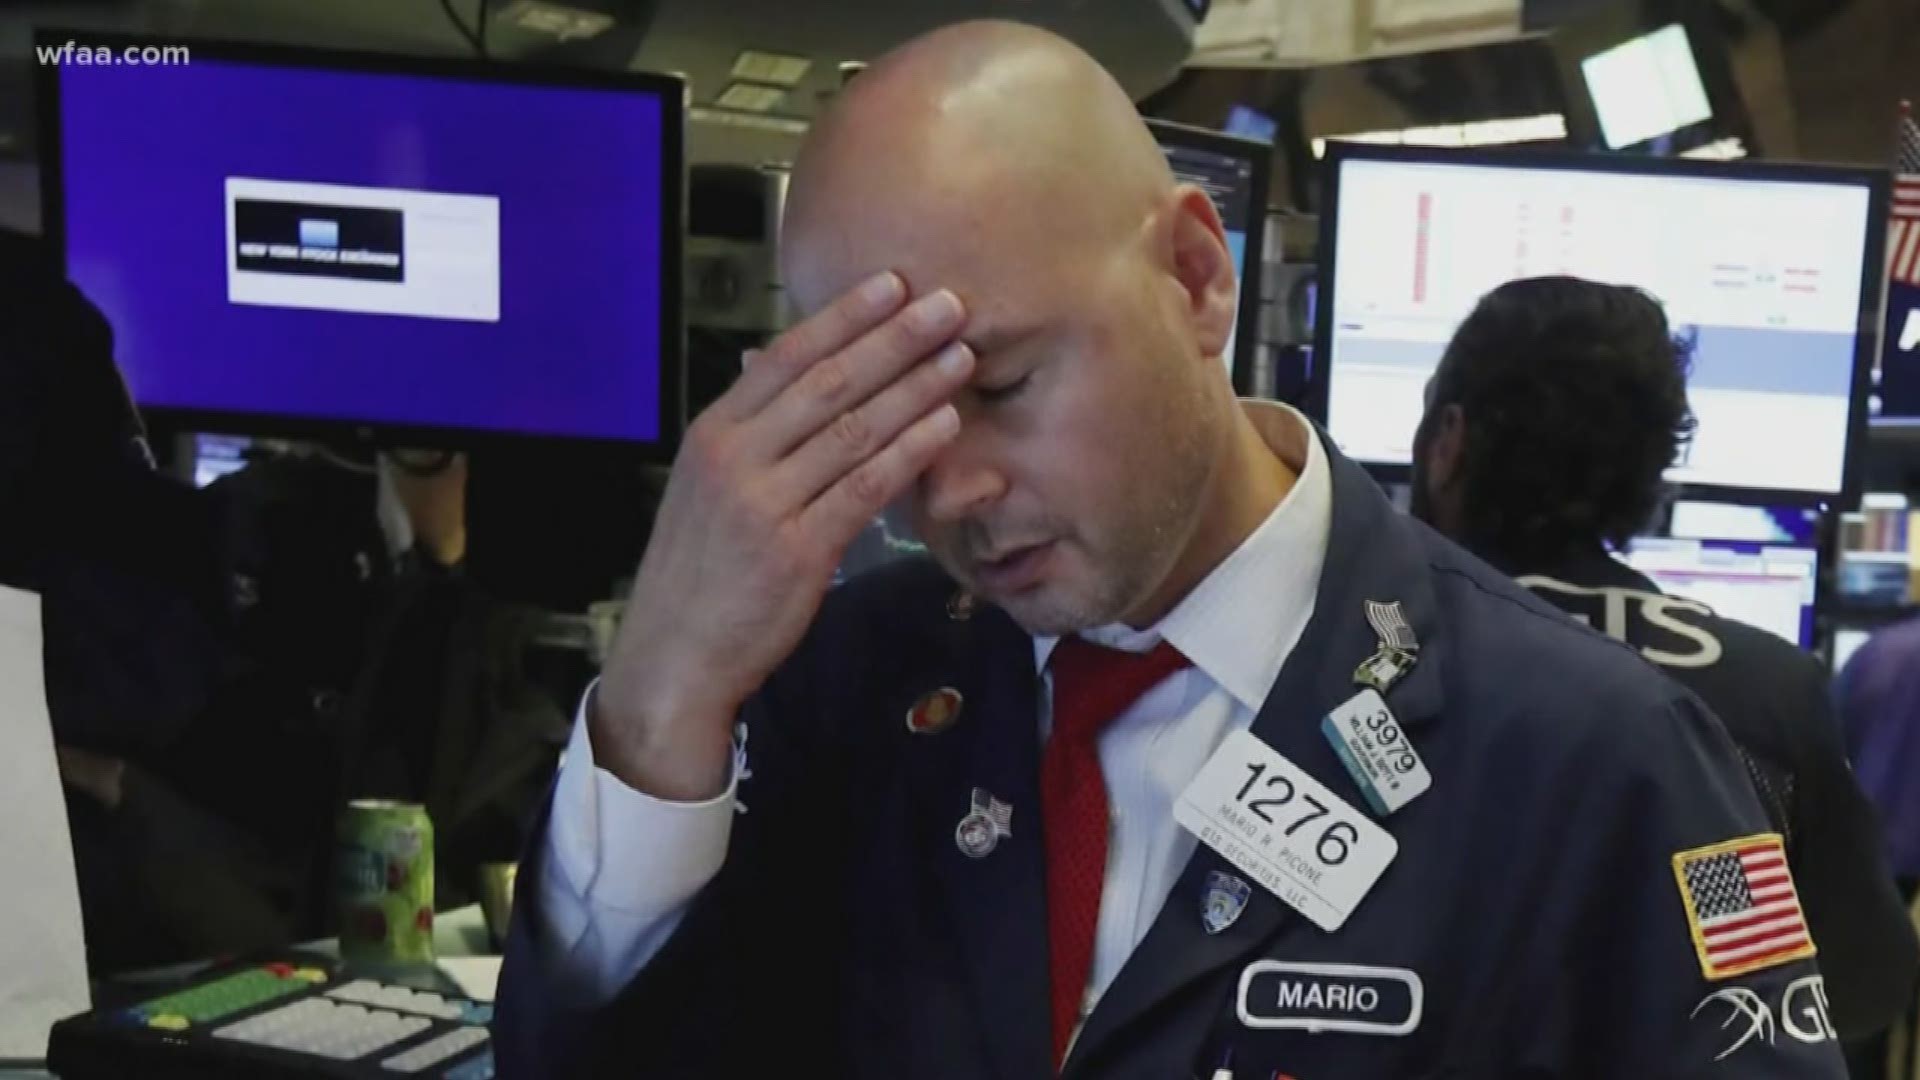 The stock market tanked Wednesday which really spooked Wall Street. WFAA's Kevin Reece breaks down the signs of a possible recession.